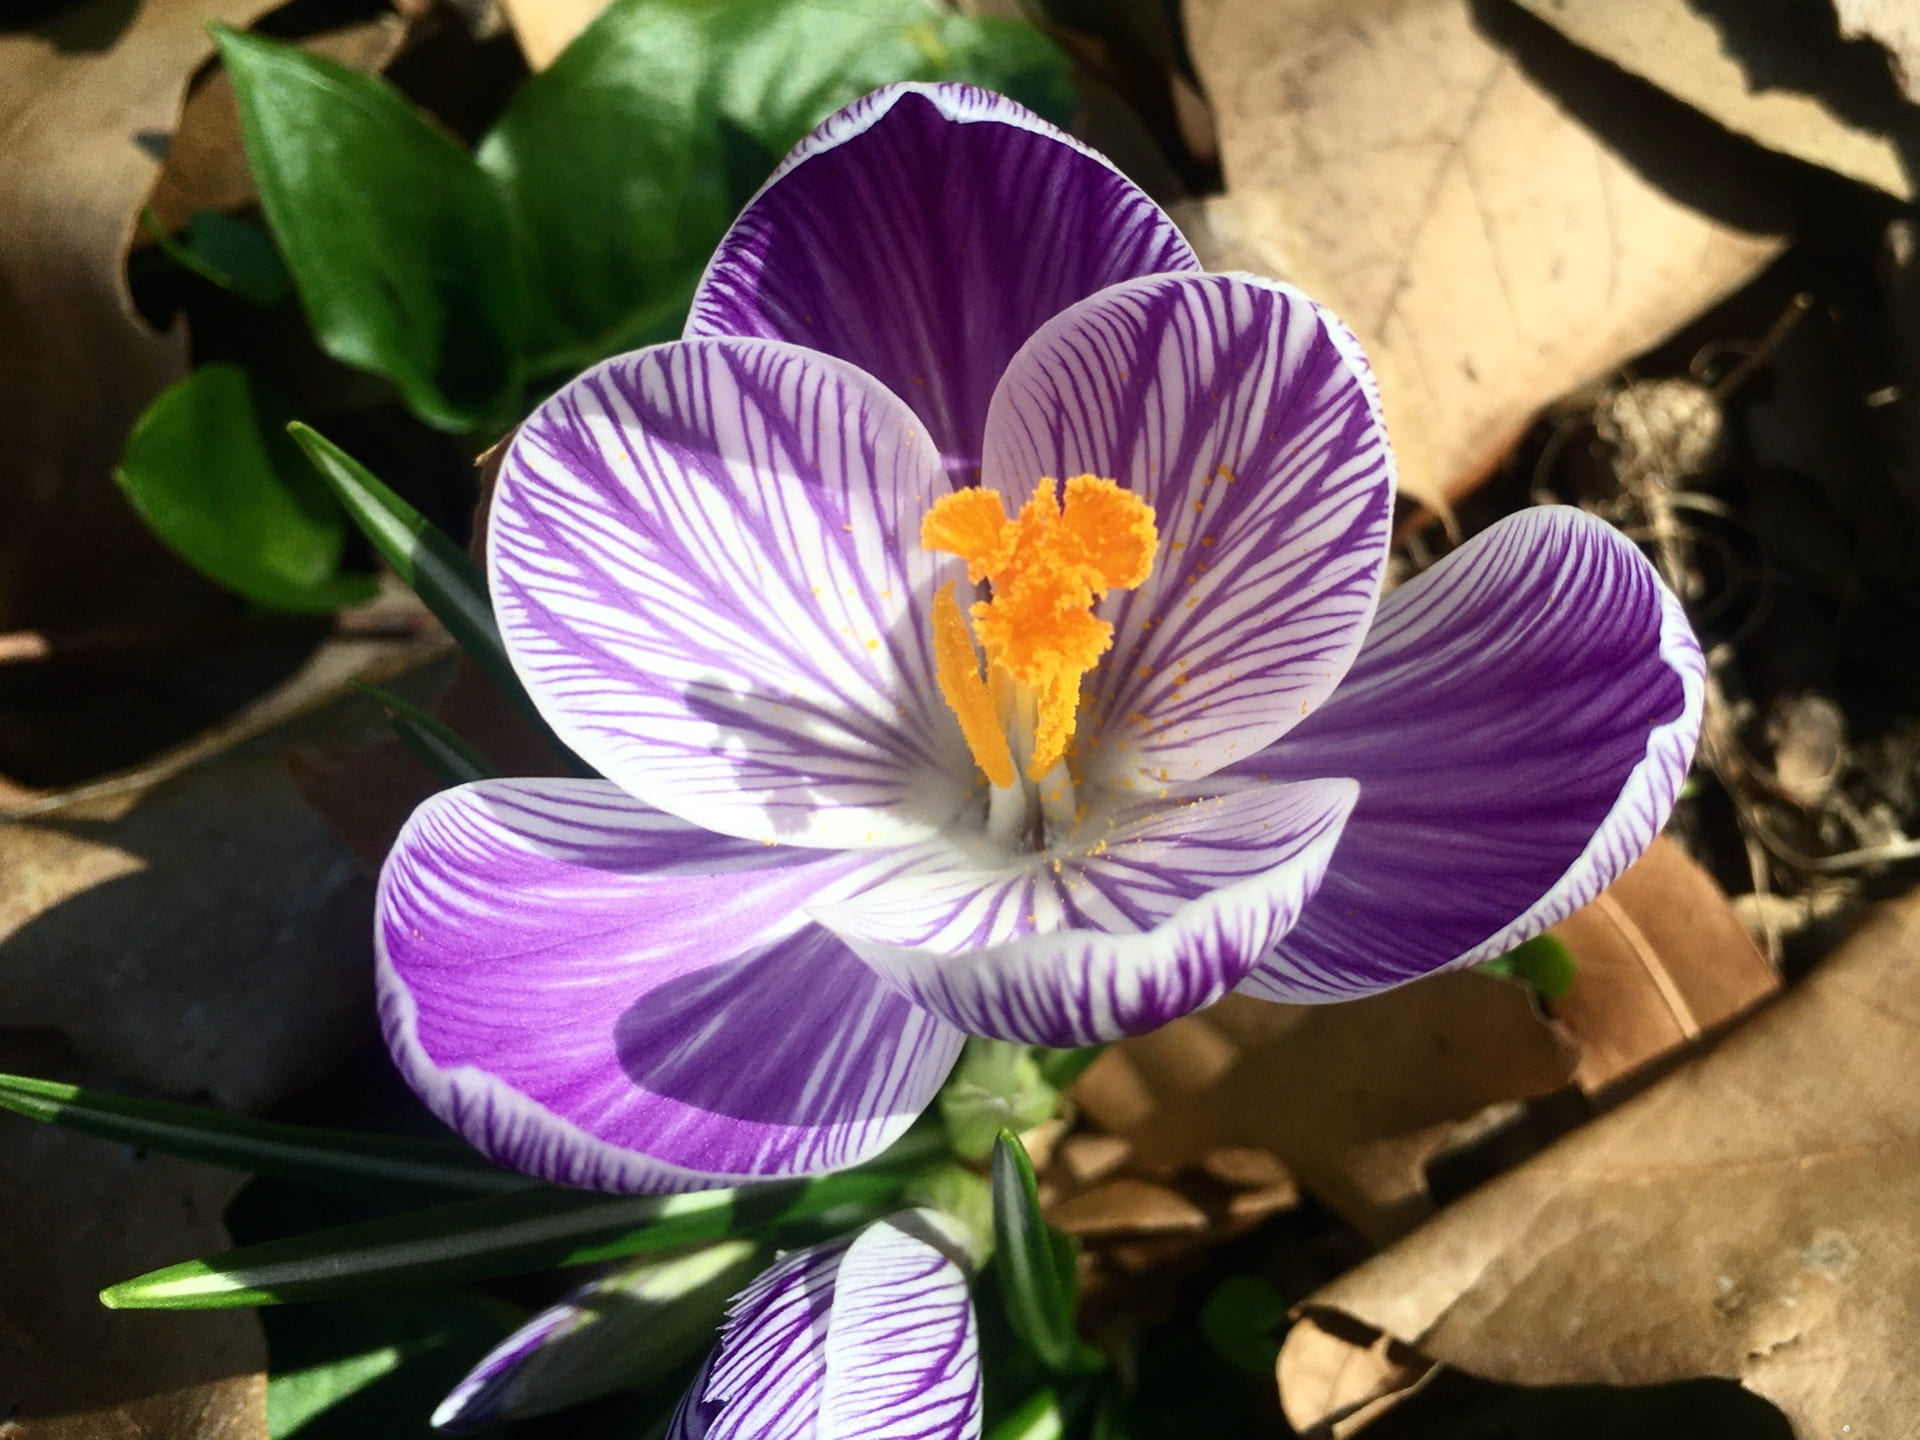 A detailed look at Crocus 'Pickwick'.